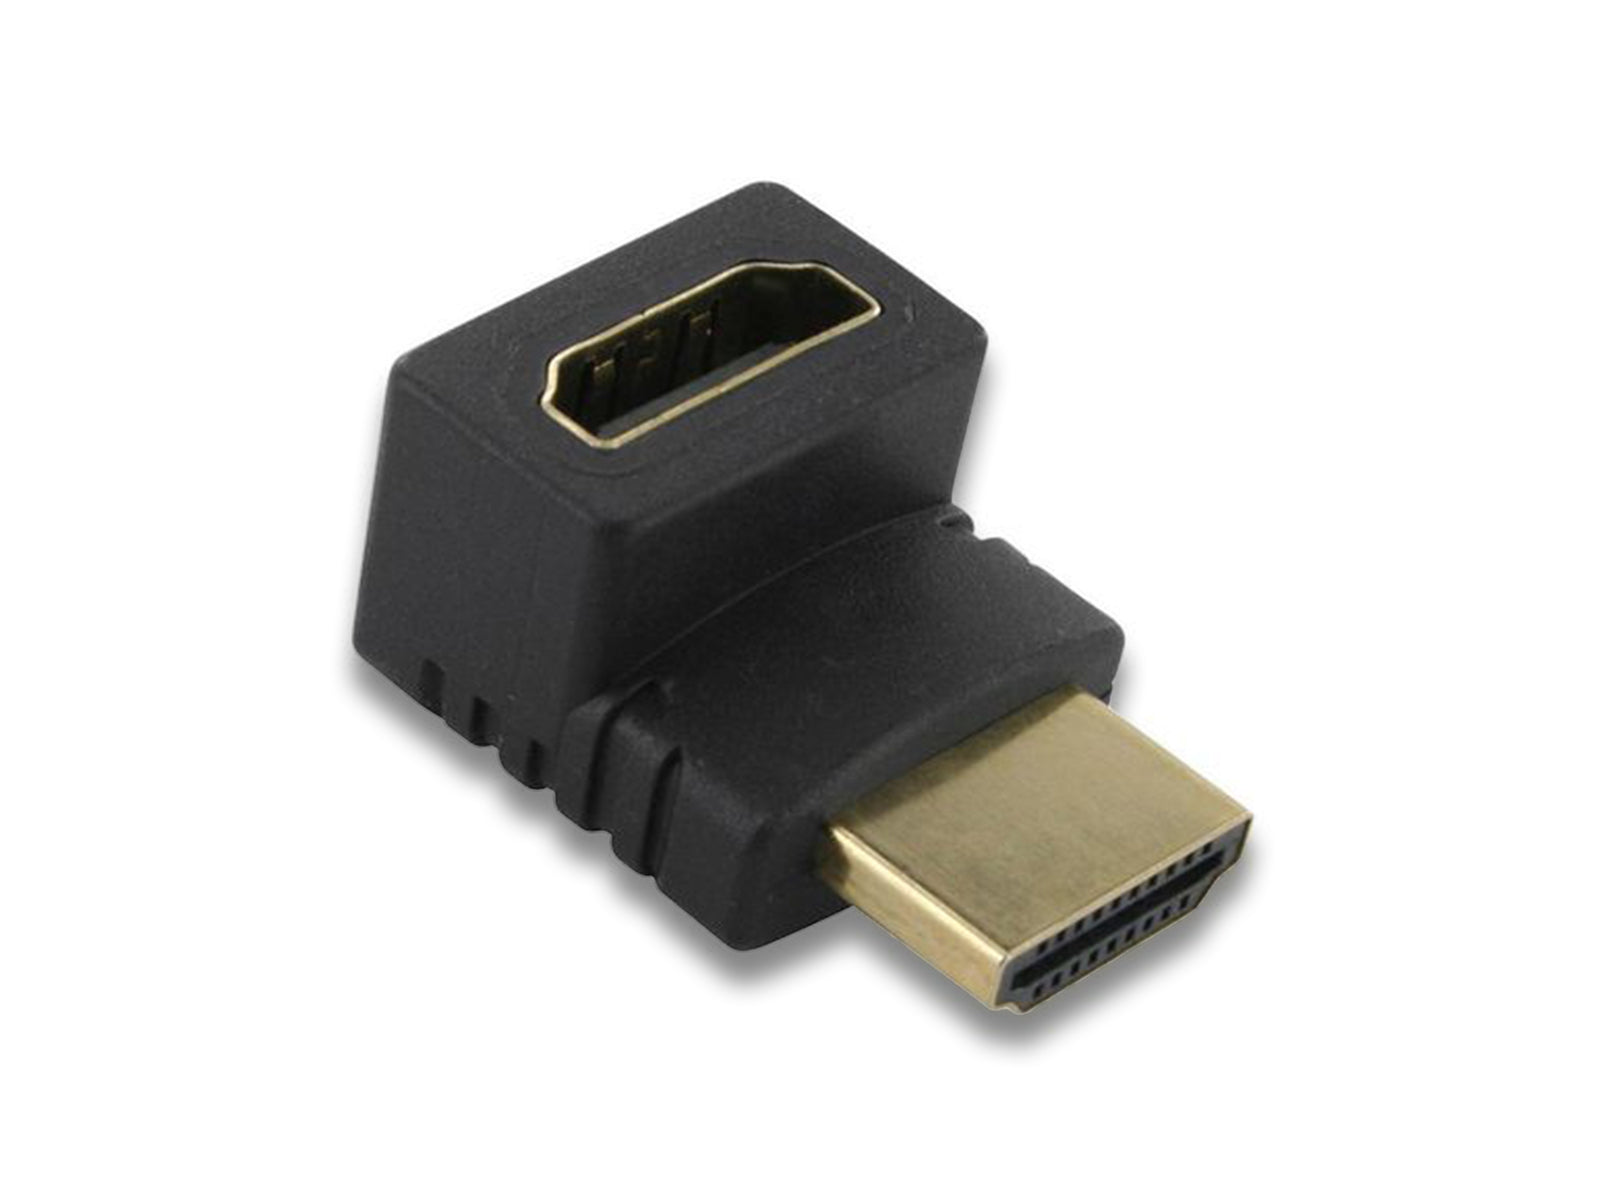 4K HDMI Adapter Port View